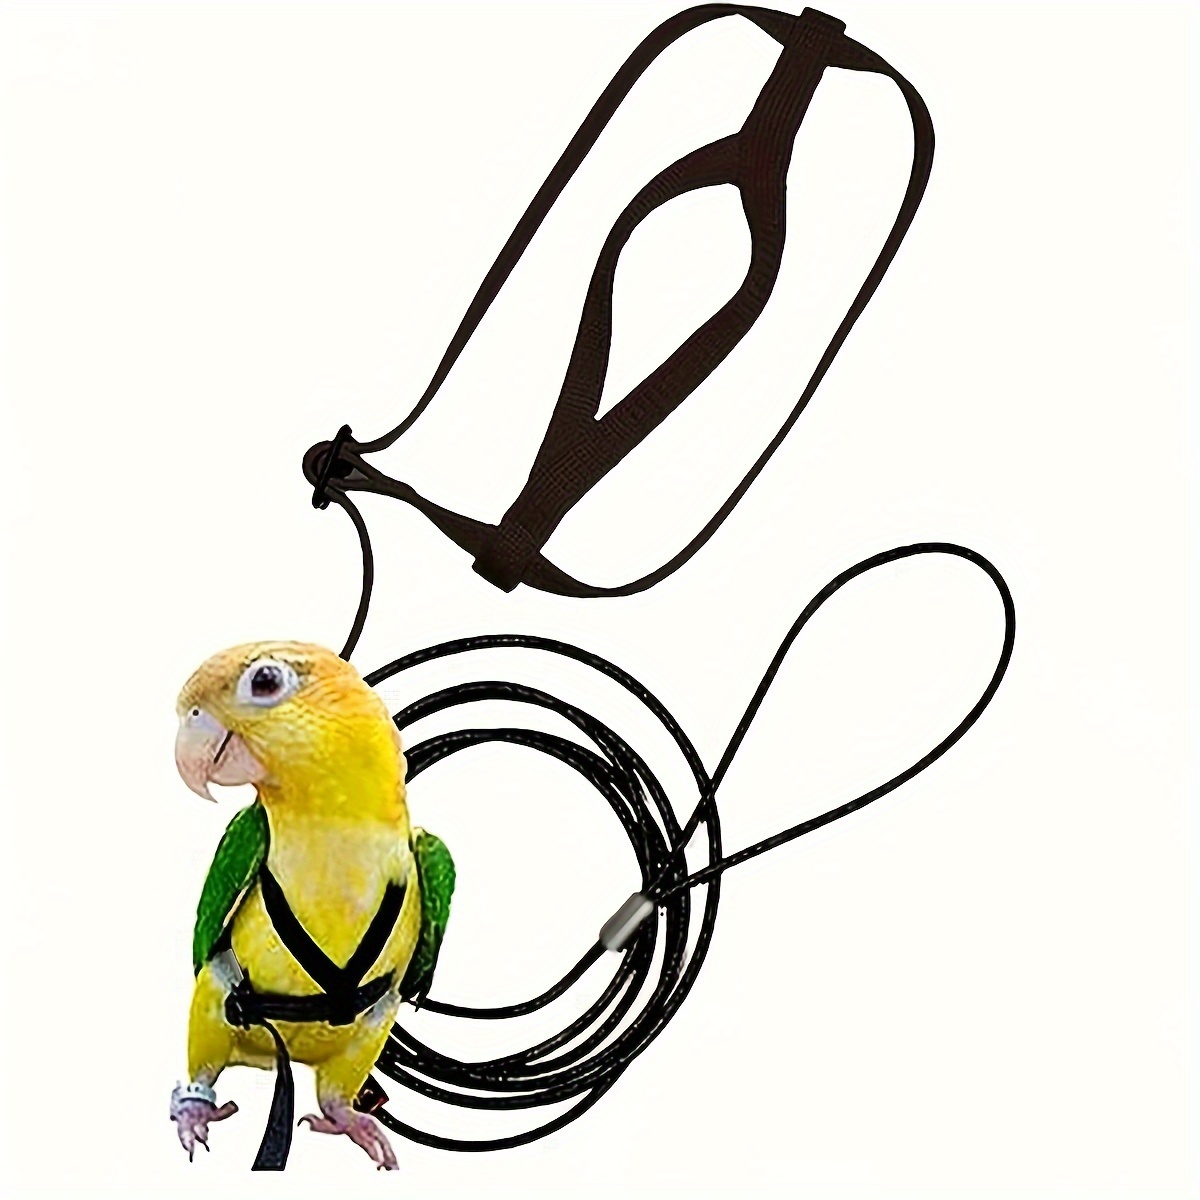 

1pc Adjustable Bird Harness Leash, Parrot Training Rope Bird Flying Harness Traction Rope For Bird